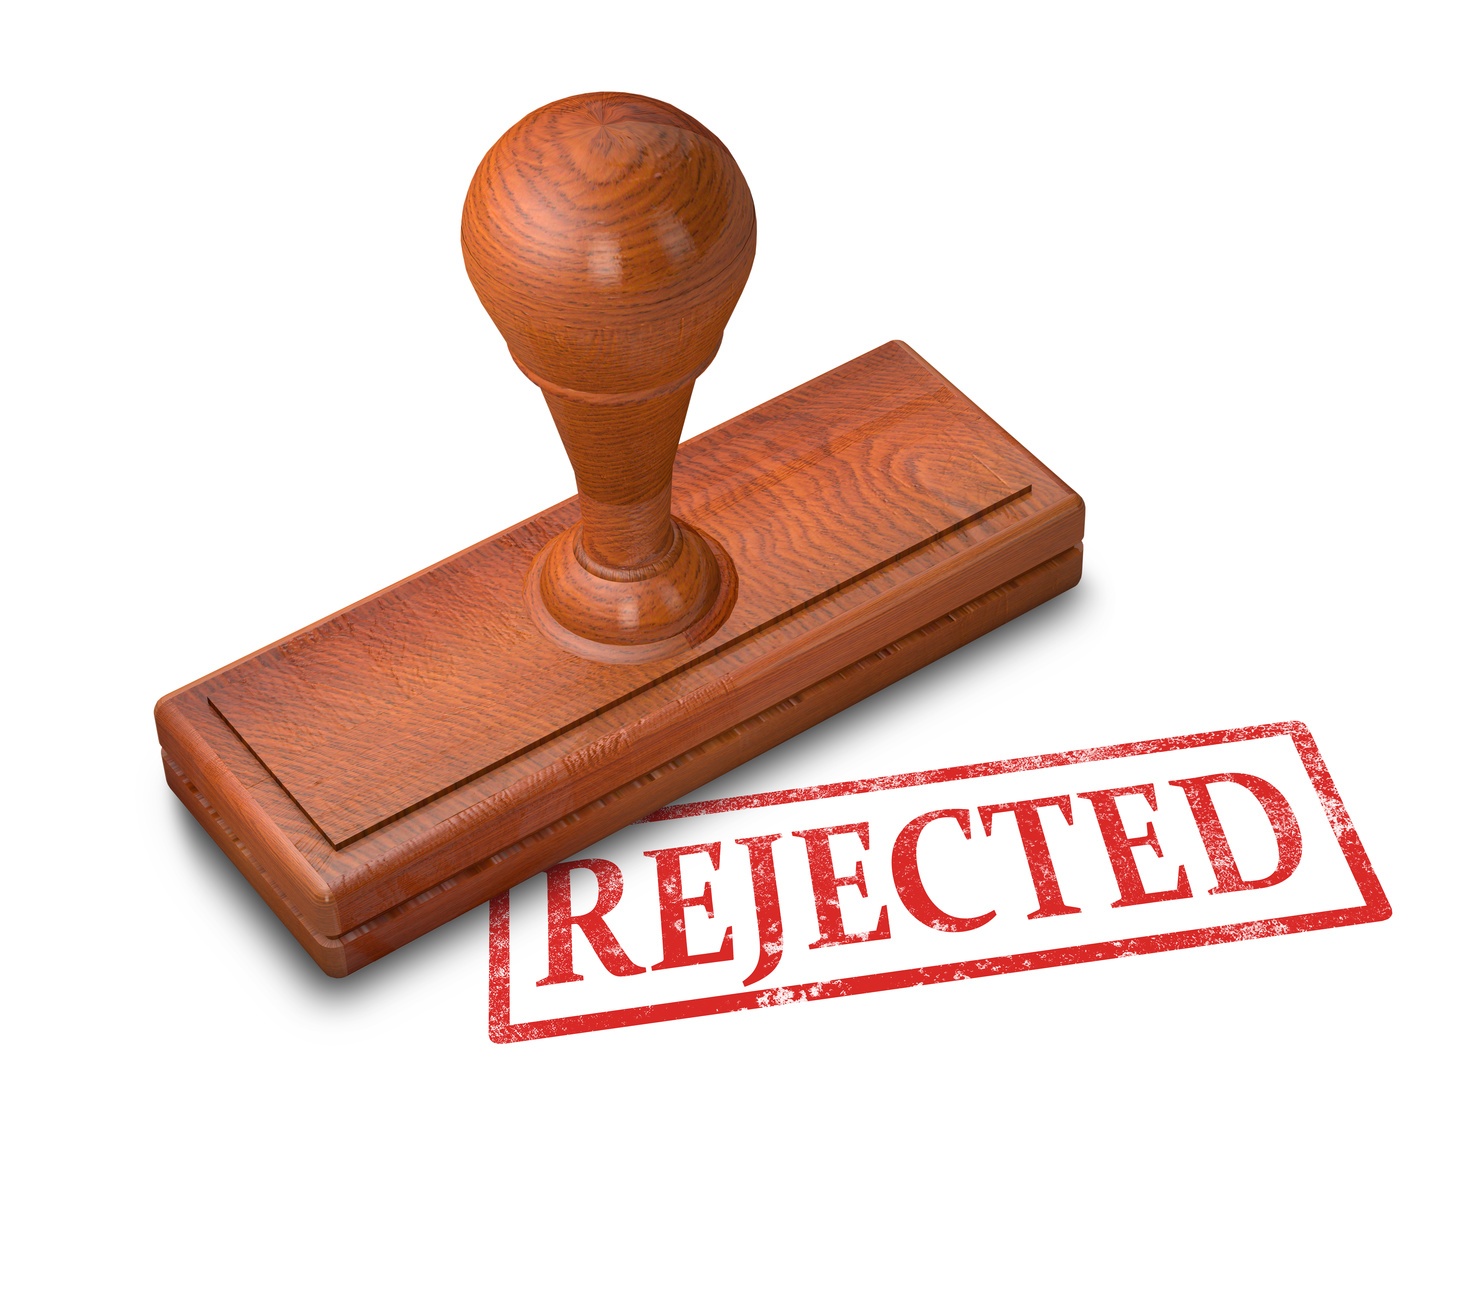 3 Reasons Your Contributed Articles Are Rejected